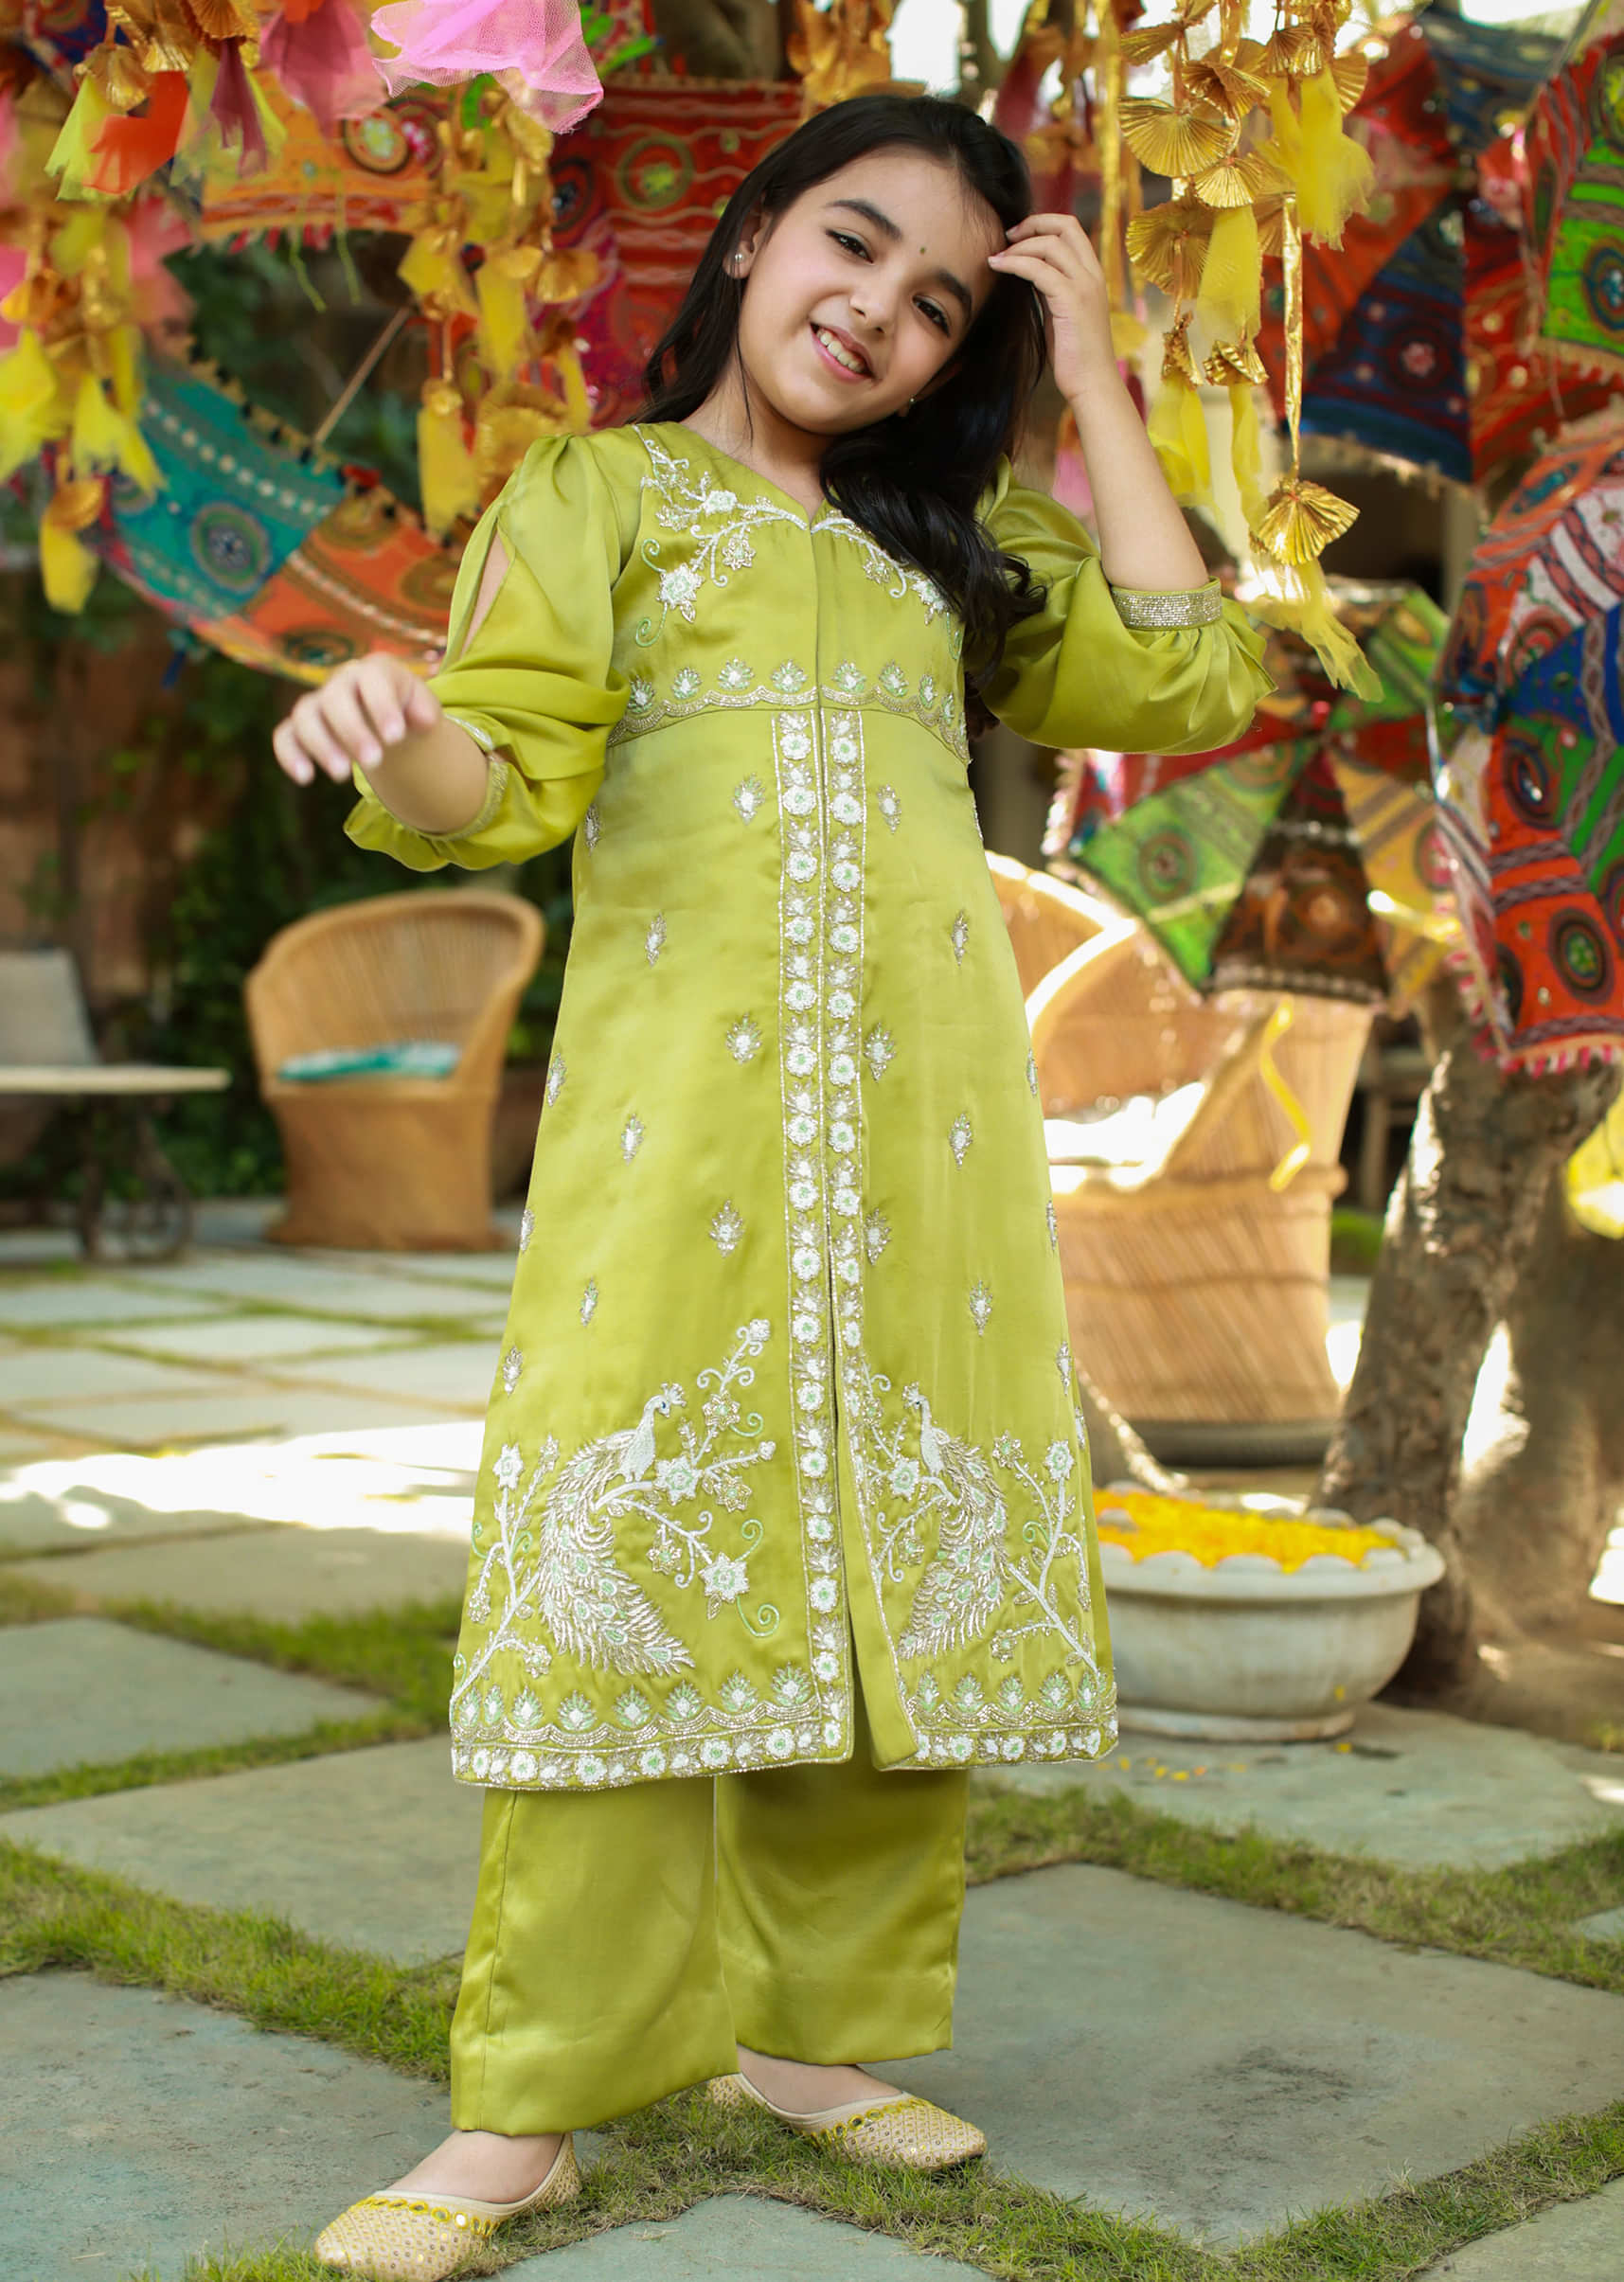 Kalki Girls Green Jacket Suit Set With Hand Crafted Embroidery Using Intricate Thread Work